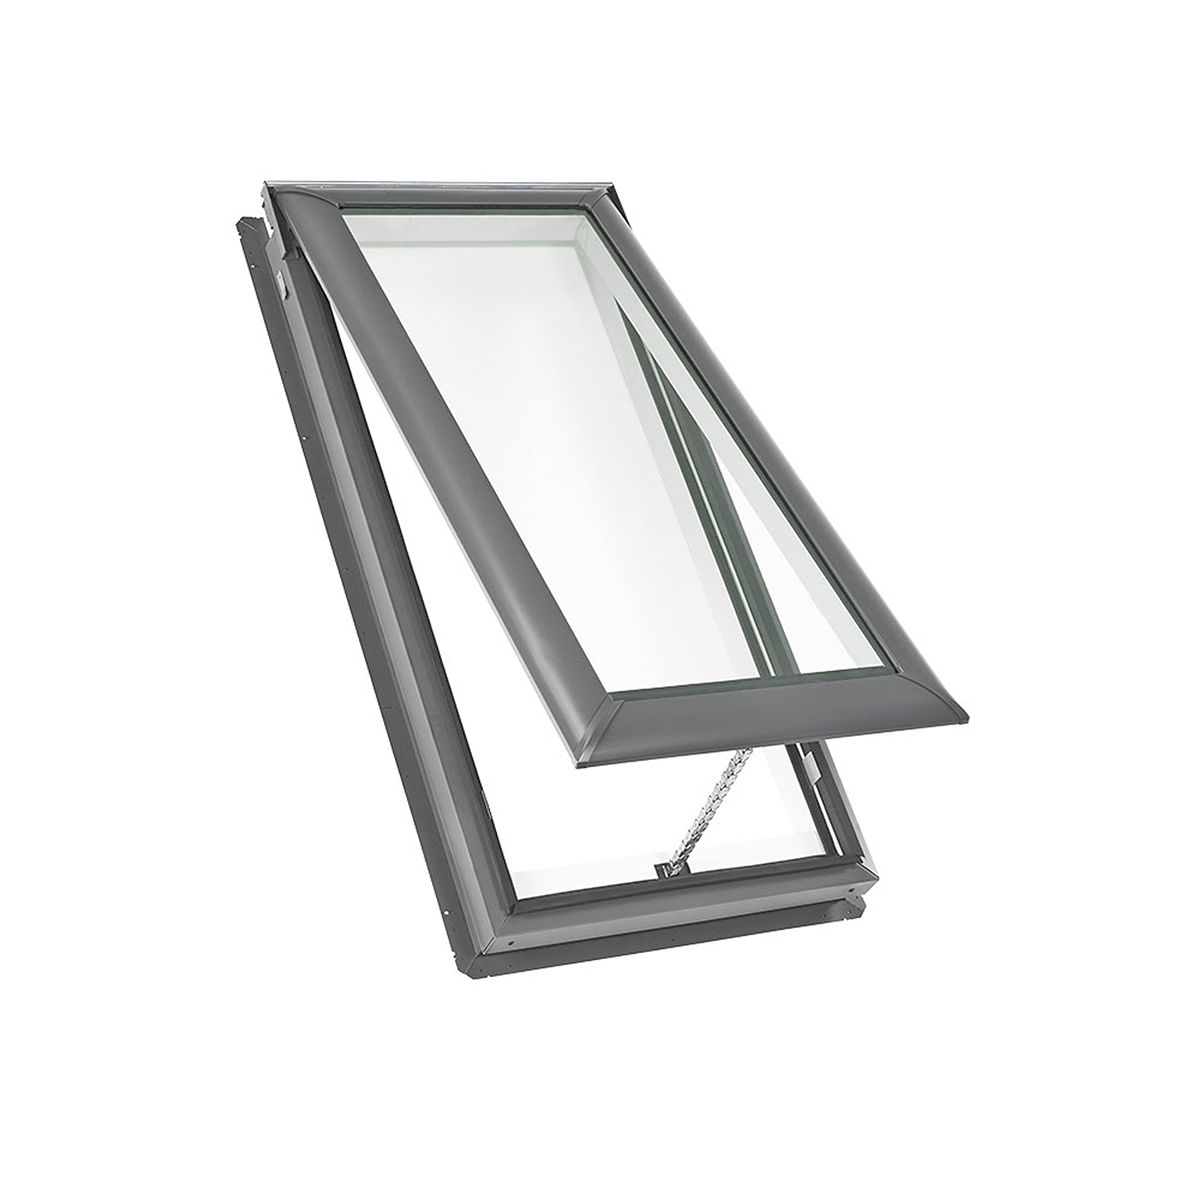 Manual Deck-Mount Skylight with Laminated Low-E3 Glass - 21 in. x 26-7/8 in. - VS C01